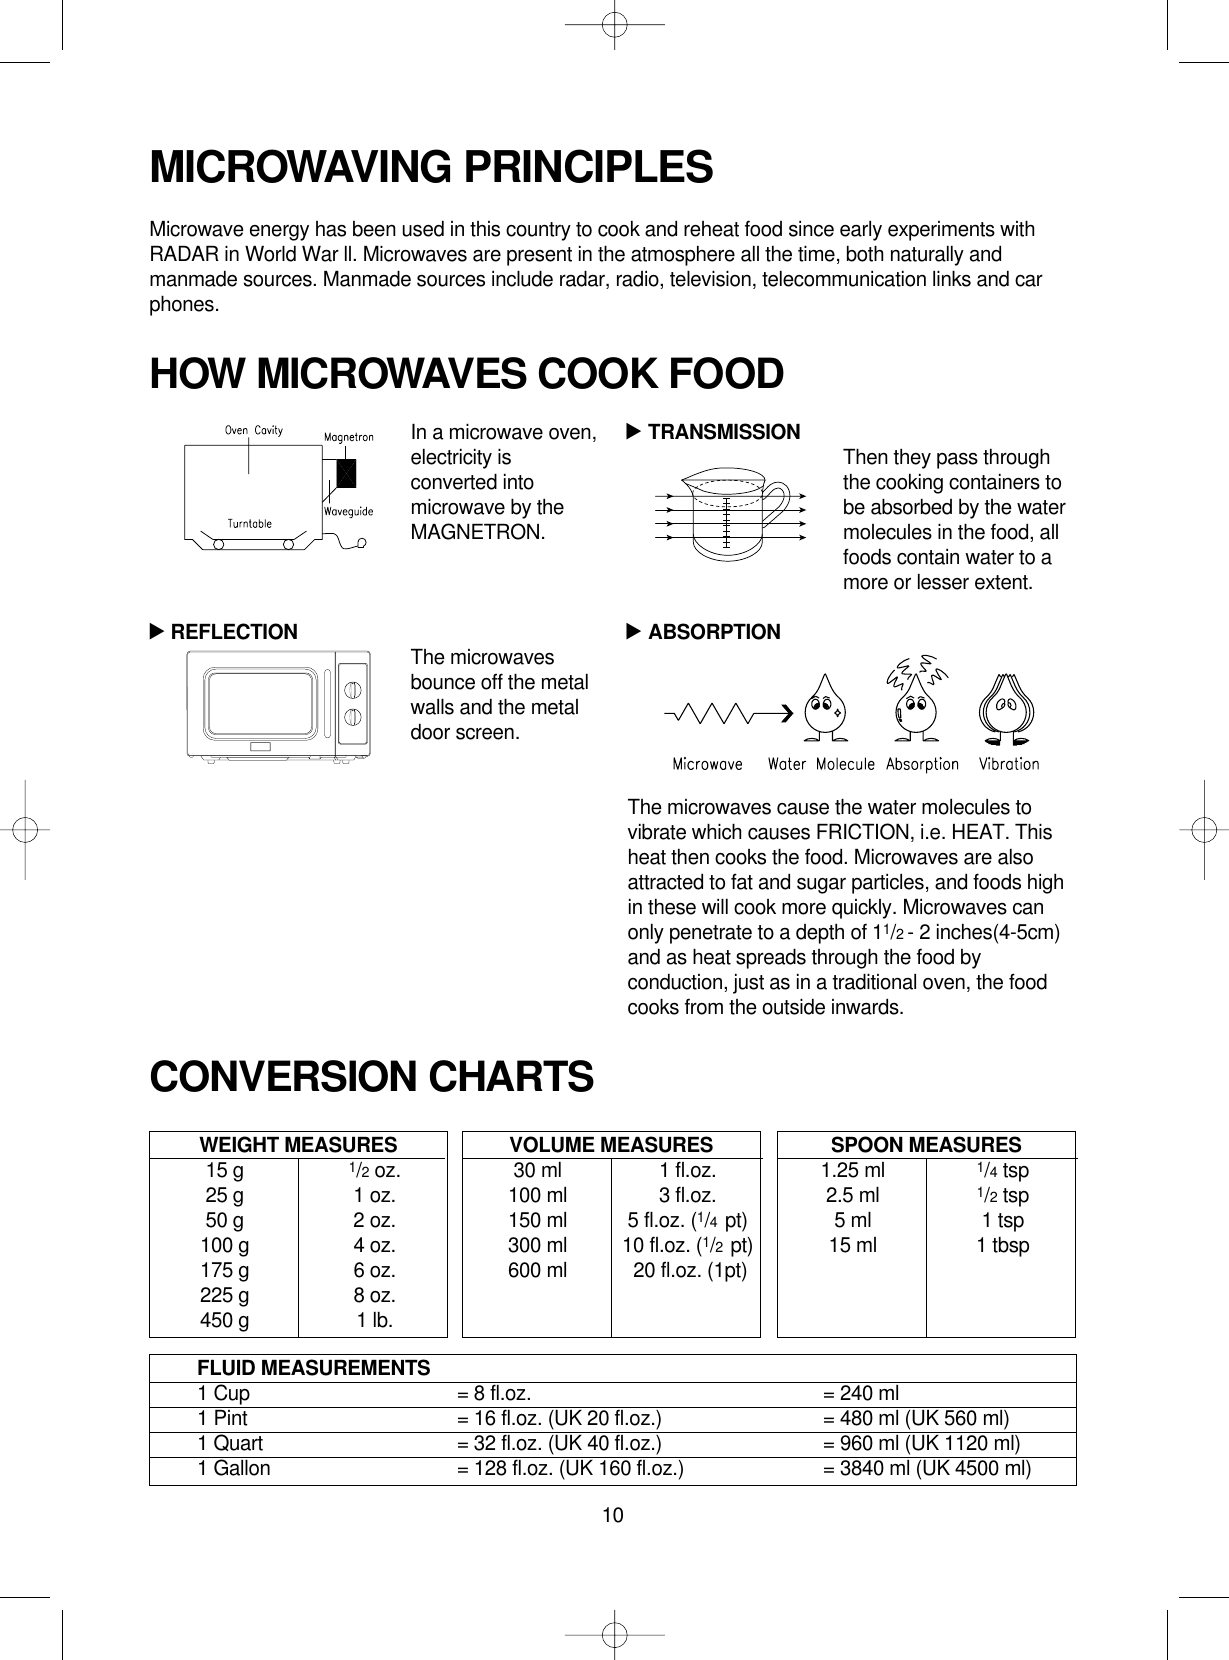 10MICROWAVING PRINCIPLESMicrowave energy has been used in this country to cook and reheat food since early experiments withRADAR in World War ll. Microwaves are present in the atmosphere all the time, both naturally andmanmade sources. Manmade sources include radar, radio, television, telecommunication links and carphones.CONVERSION CHARTSIn a microwave oven,electricity isconverted intomicrowave by theMAGNETRON.REFLECTION The microwavesbounce off the metalwalls and the metaldoor screen.TRANSMISSION Then they pass throughthe cooking containers tobe absorbed by the watermolecules in the food, allfoods contain water to amore or lesser extent.ABSORPTIONThe microwaves cause the water molecules tovibrate which causes FRICTION, i.e. HEAT. Thisheat then cooks the food. Microwaves are alsoattracted to fat and sugar particles, and foods highin these will cook more quickly. Microwaves canonly penetrate to a depth of 11/2 - 2 inches(4-5cm)and as heat spreads through the food byconduction, just as in a traditional oven, the foodcooks from the outside inwards.WEIGHT MEASURES15 g 1/2oz.25 g 1 oz.50 g 2 oz.100 g 4 oz.175 g 6 oz.225 g 8 oz.450 g 1 lb.HOW MICROWAVES COOK FOOD▲▲▲VOLUME MEASURES30 ml 1 fl.oz.100 ml 3 fl.oz.150 ml 5 fl.oz. (1/4  pt)300 ml 10 fl.oz. (1/2  pt)600 ml 20 fl.oz. (1pt)SPOON MEASURES1.25 ml 1/4tsp2.5 ml 1/2tsp5 ml 1 tsp15 ml 1 tbspFLUID MEASUREMENTS1 Cup = 8 fl.oz. = 240 ml1 Pint = 16 fl.oz. (UK 20 fl.oz.) = 480 ml (UK 560 ml)1 Quart = 32 fl.oz. (UK 40 fl.oz.) = 960 ml (UK 1120 ml)1 Gallon = 128 fl.oz. (UK 160 fl.oz.) = 3840 ml (UK 4500 ml)